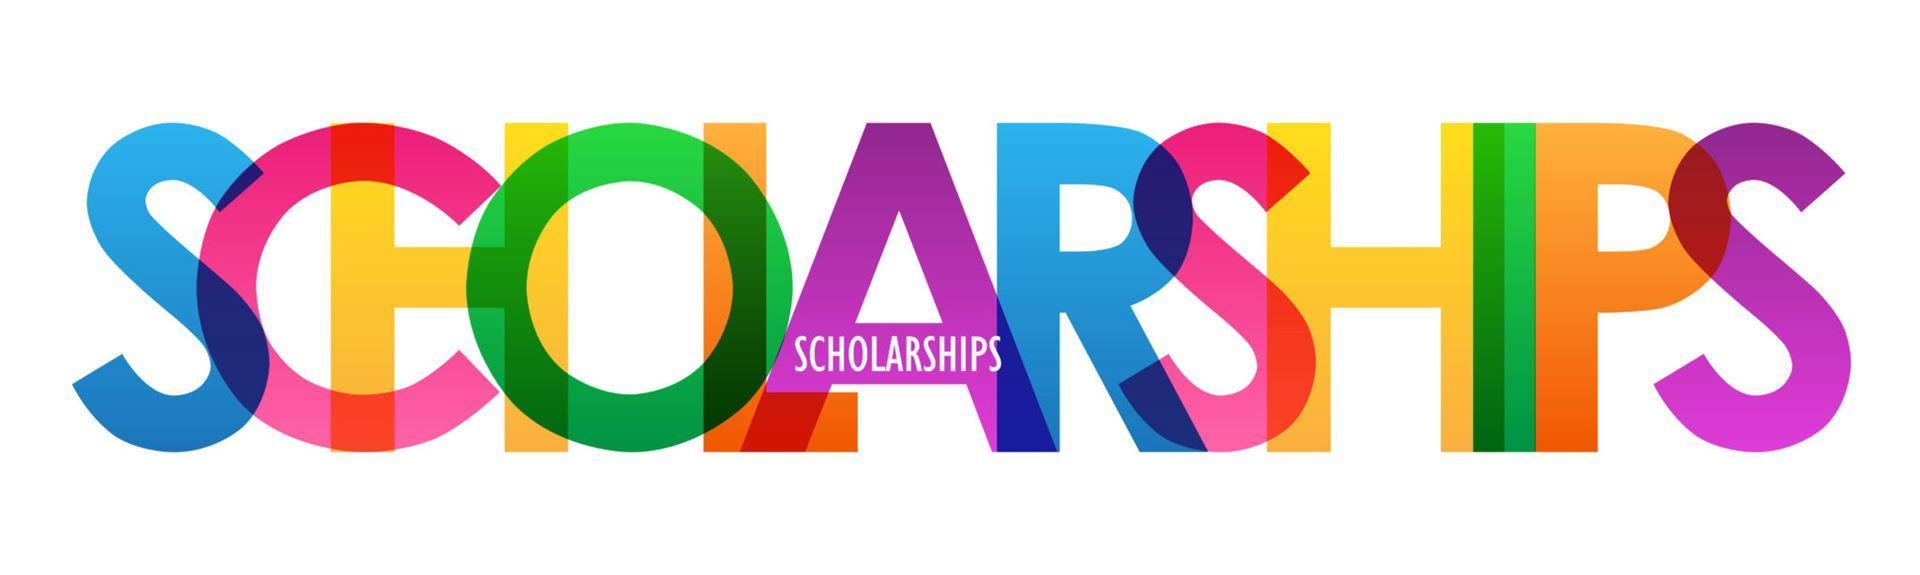  2023 SCHOLARSHIPS AVAILABLE TO TRI STAR STUDENTS: Featured Image 1 